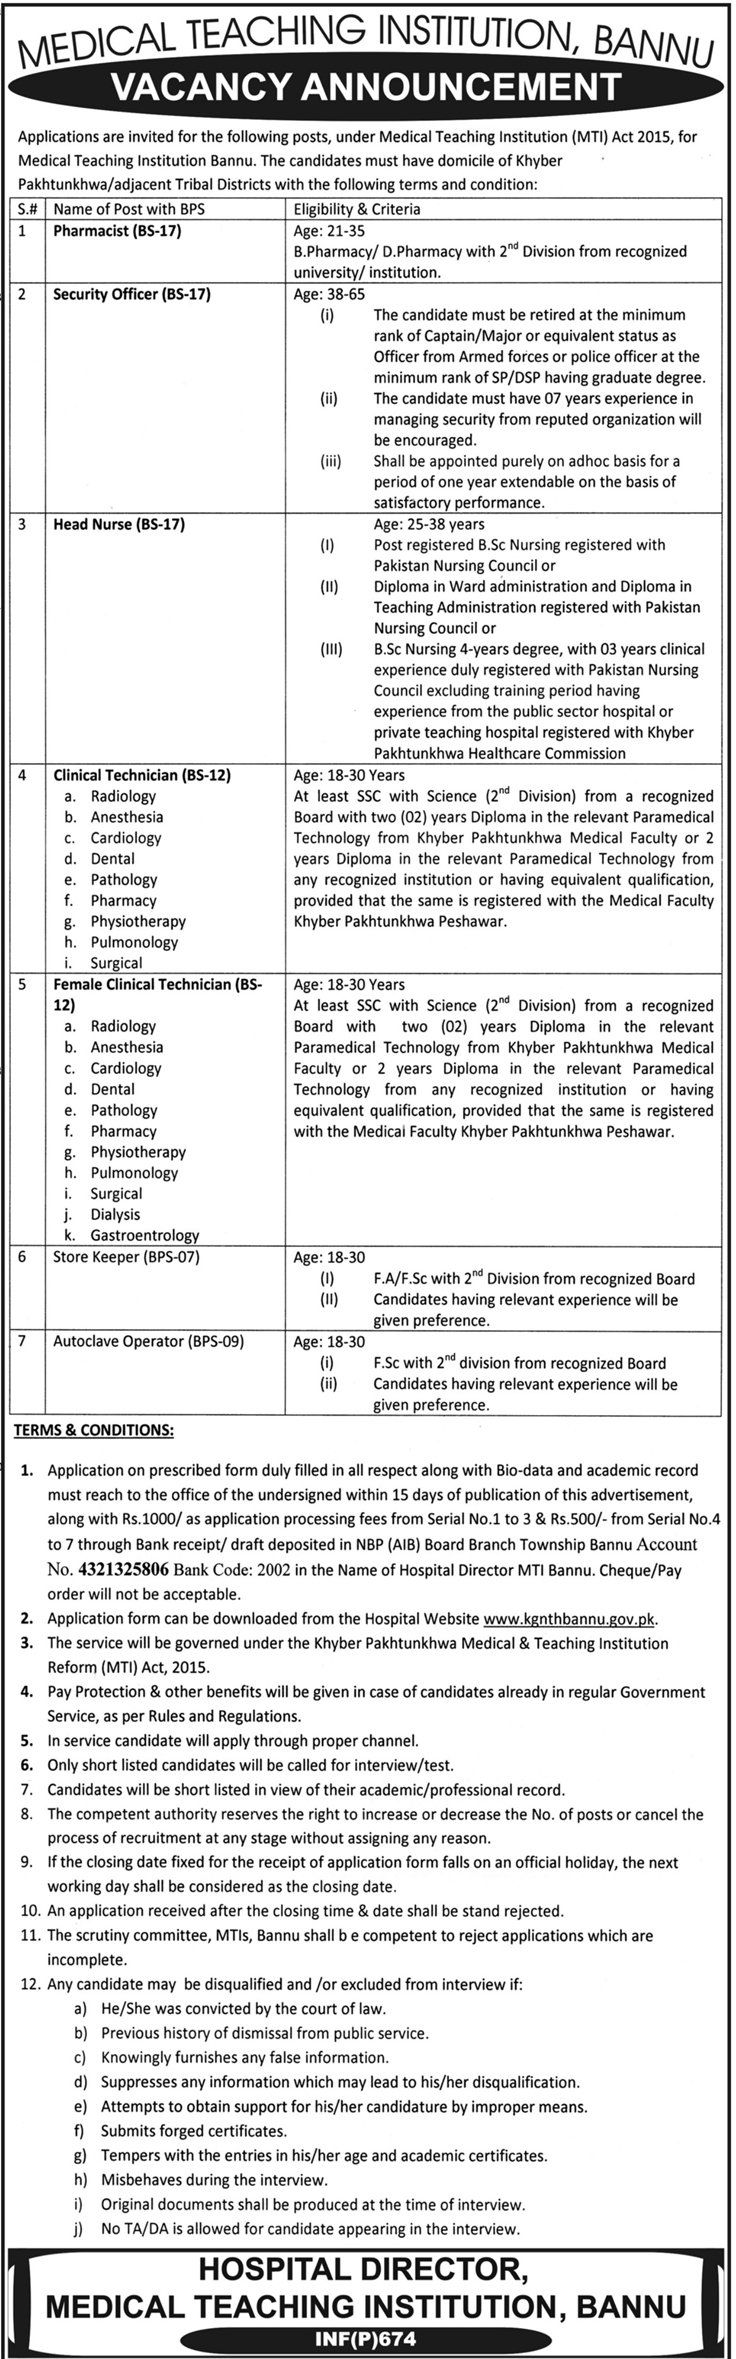 Medical Teaching Institution Bannu Jobs 2019 for Paramedical, Pharmacists, Nurses & Other Posts